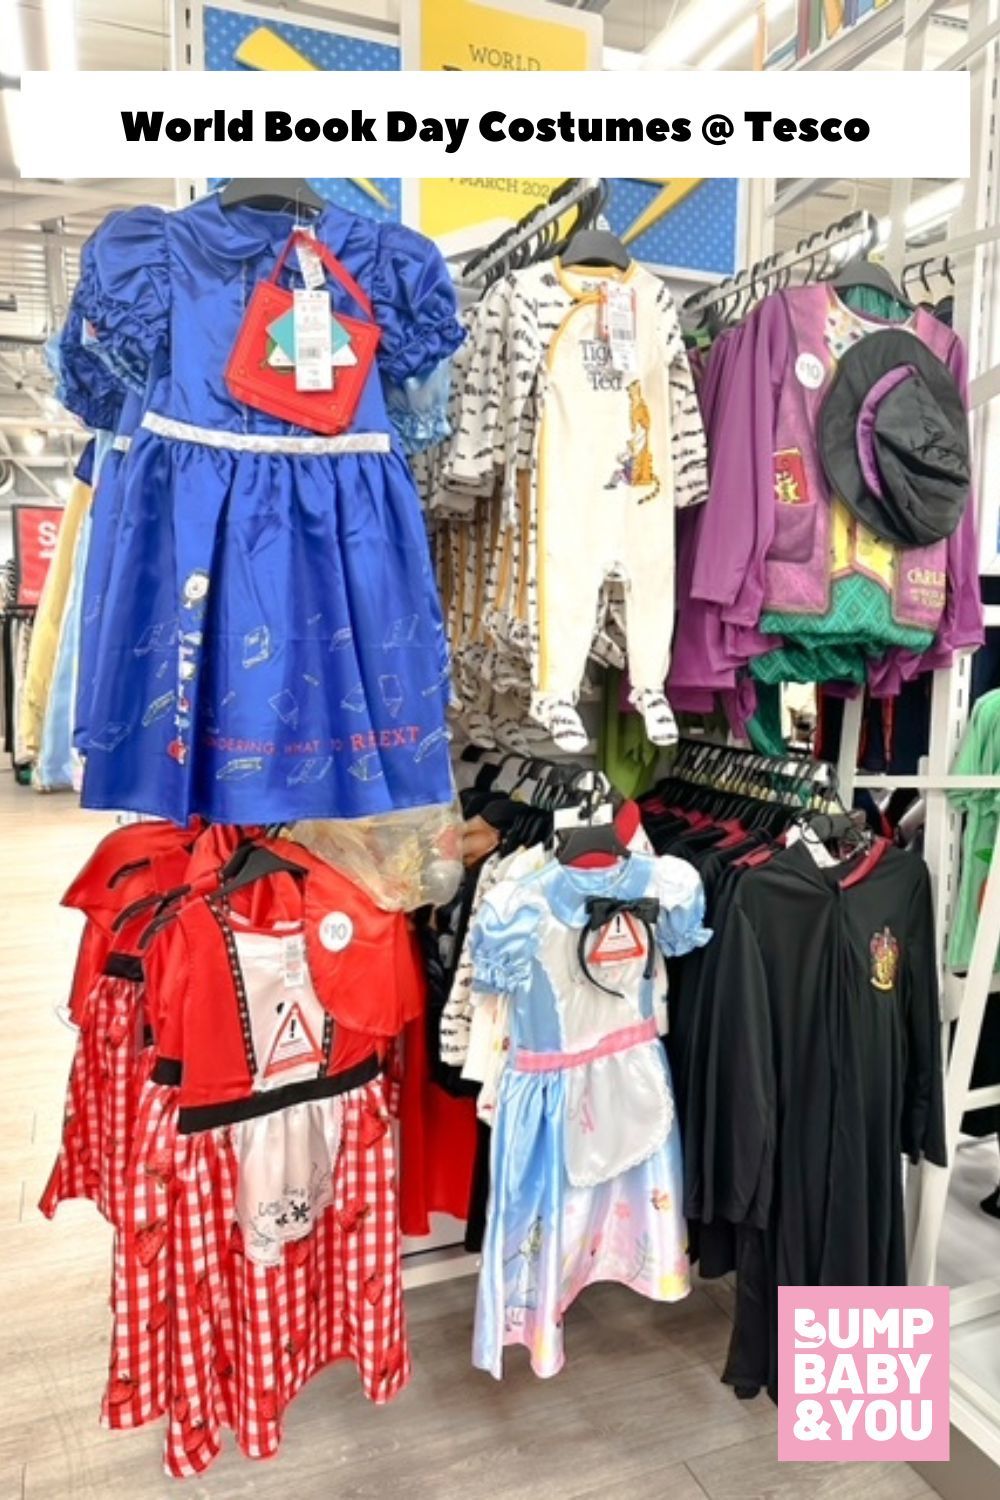 world-book-day-costumes-tesco-2